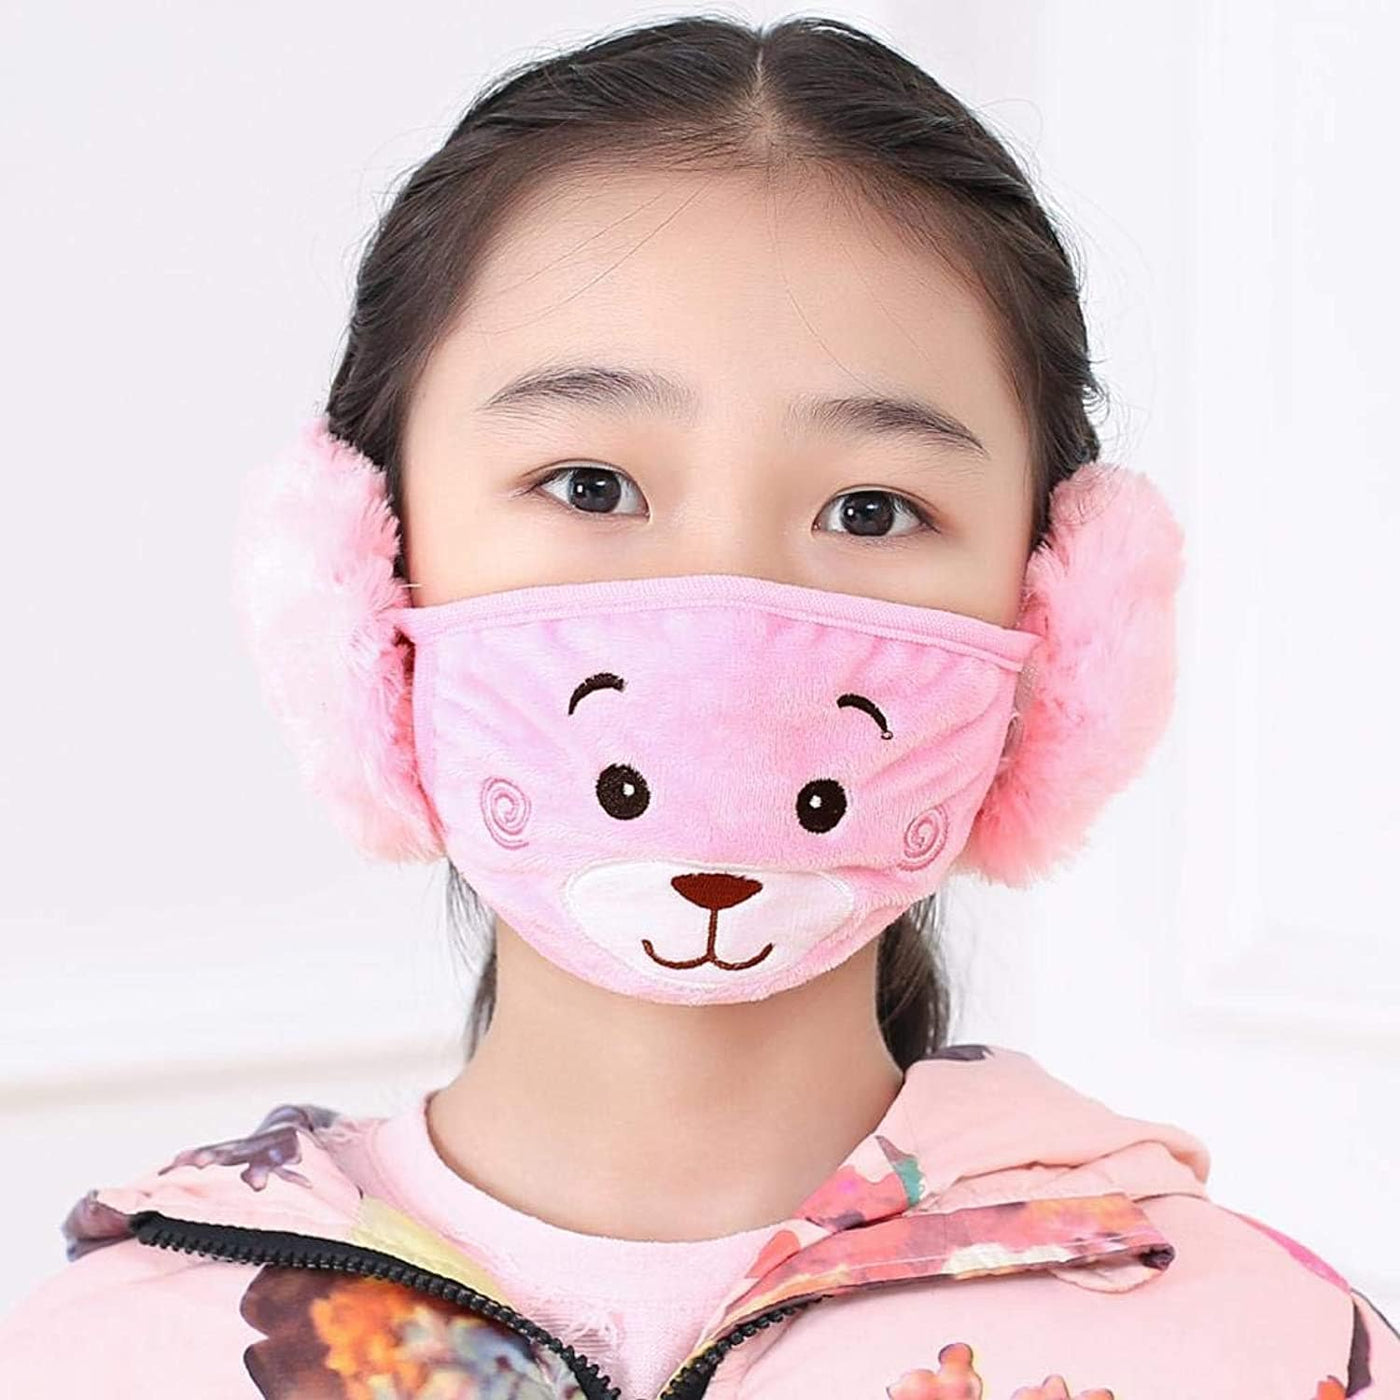 LAMANSH Winter Masks Multicolor / Fabric / Pack of 5 LAMANSH® 5 pc Girls/Boys Warm Winter Face Mask with Plush Ear Muffs Ear Covers Pack of 5 (Size 3-16 Years)